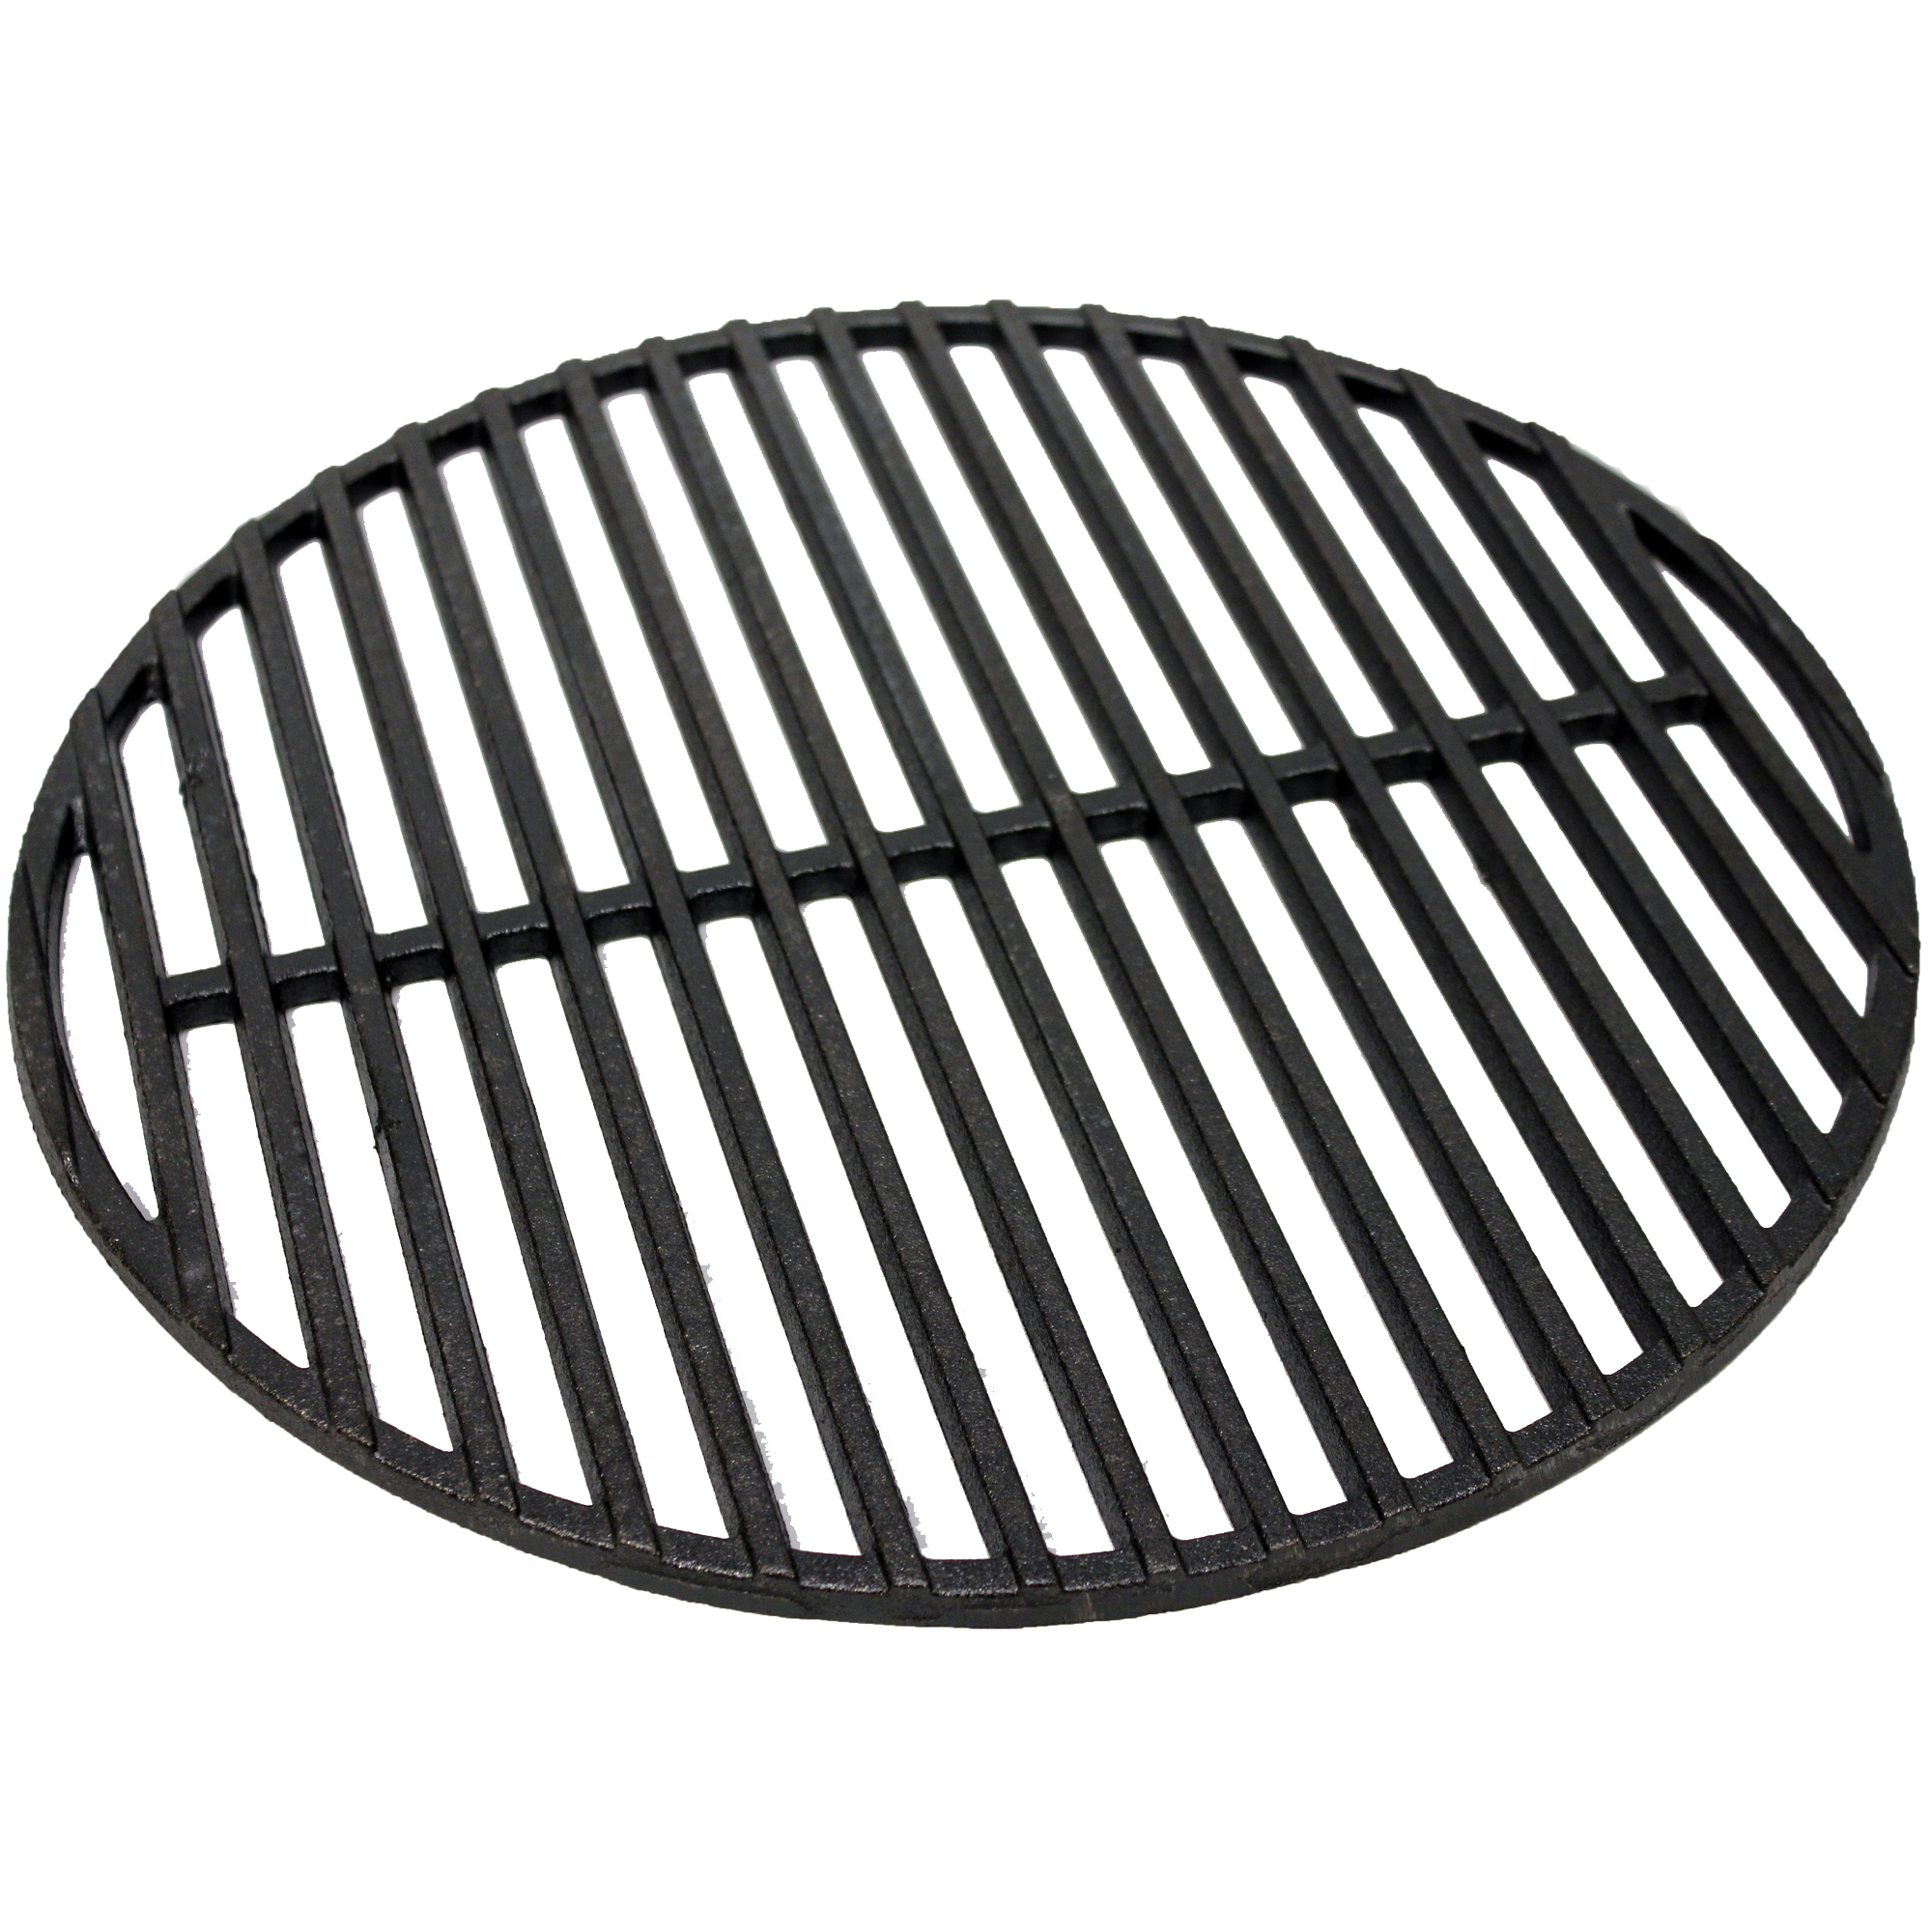 Kamado Grill - Cast Iron Cooking Grill 21 inch (410-CCG-21)